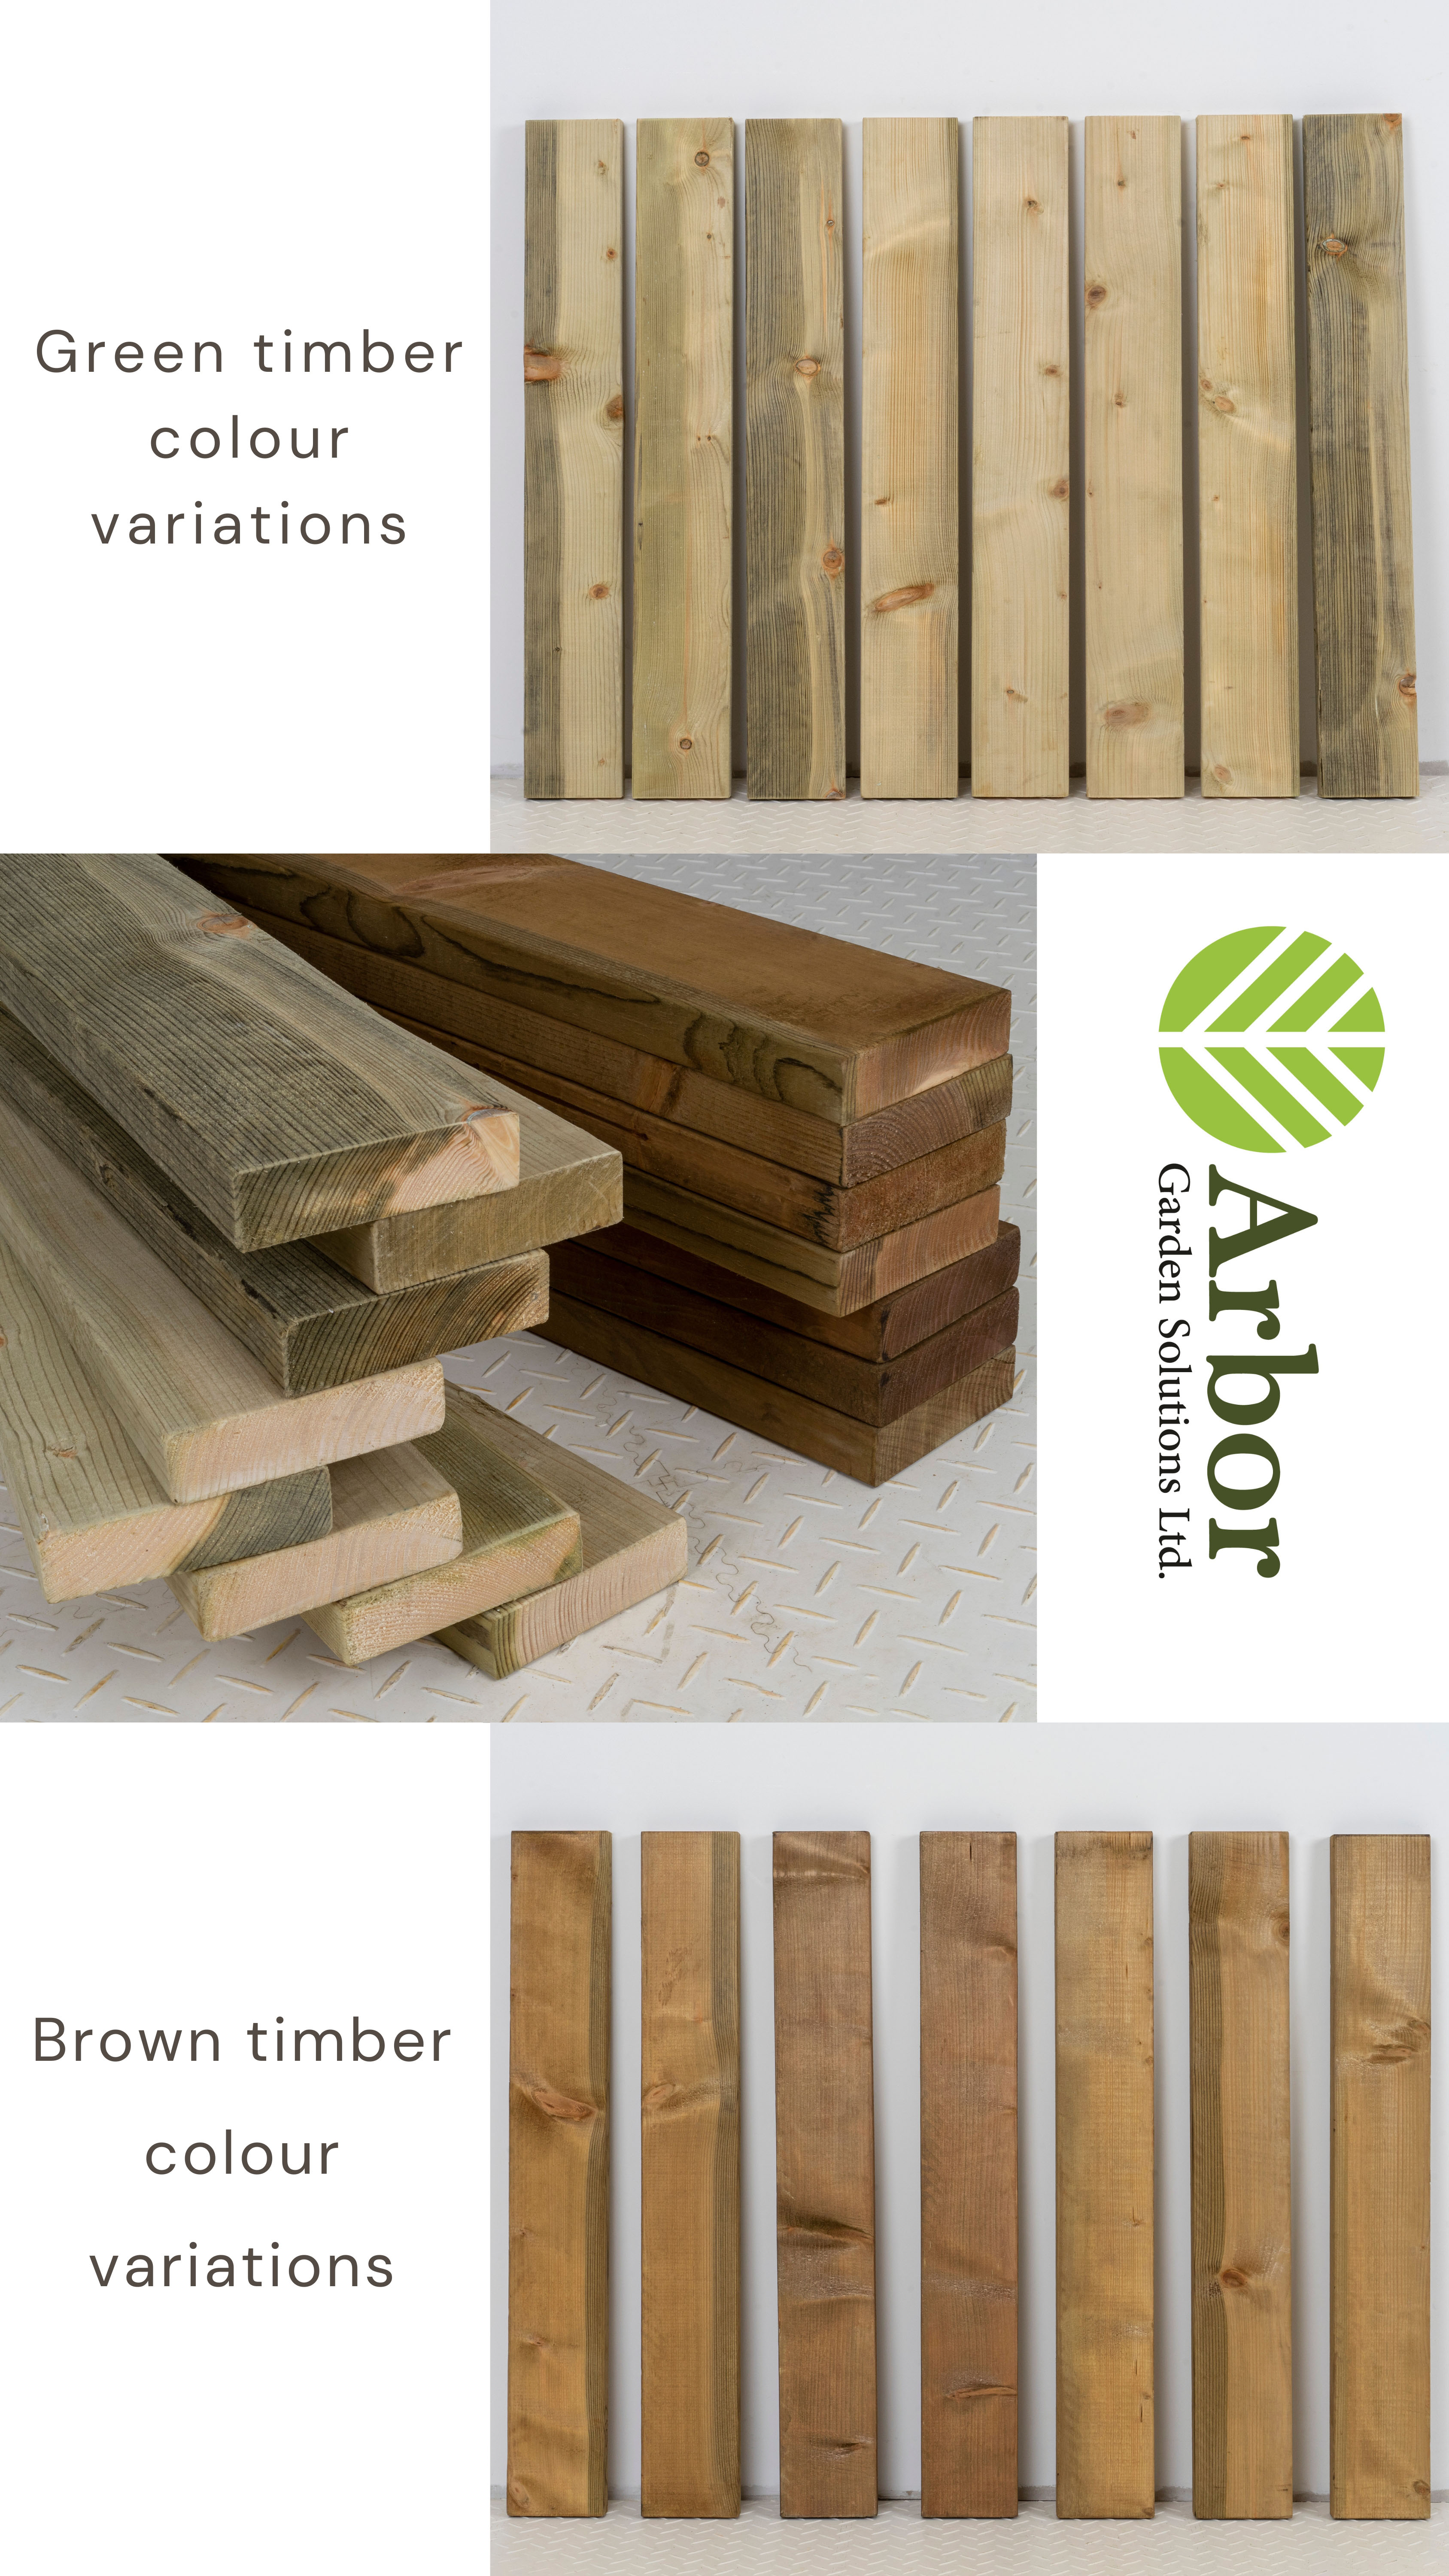 Exploring Natural Colour Variations and Pressure Treated Timber